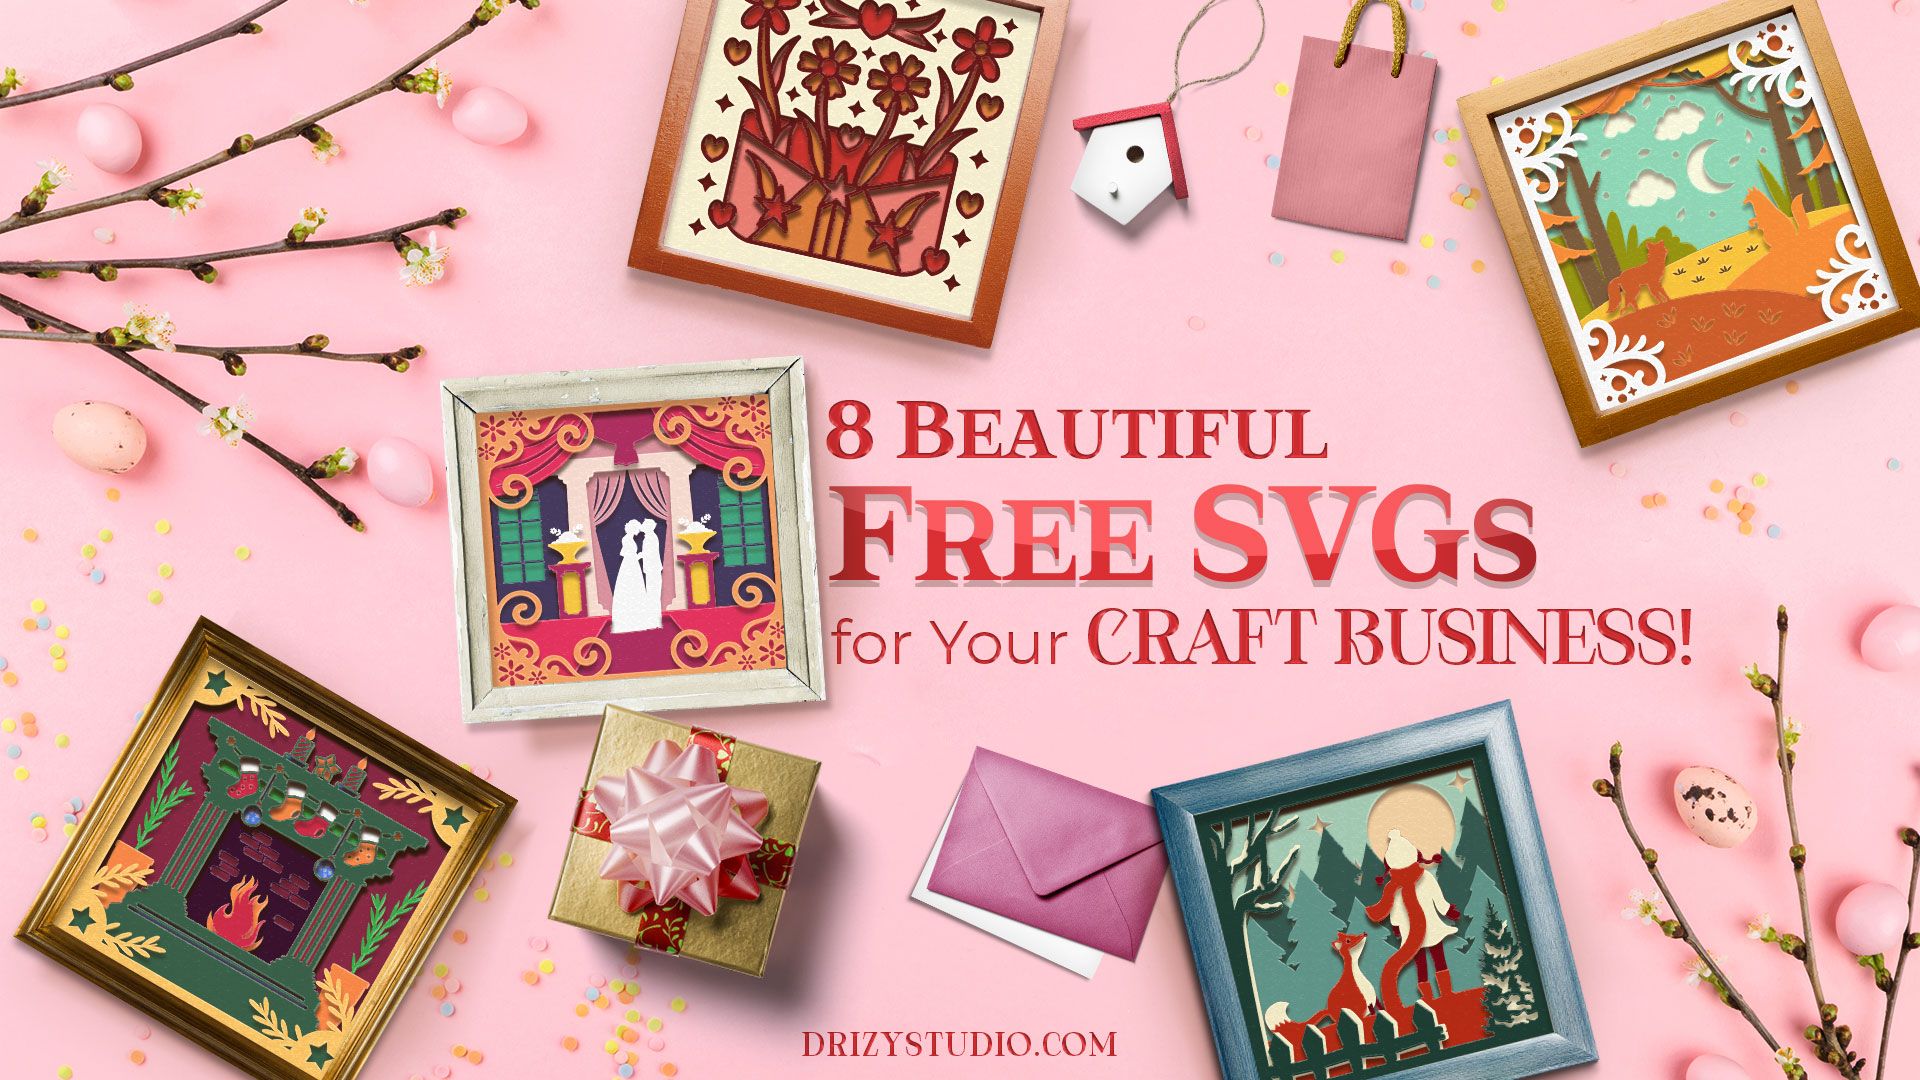 8 Beautiful Free SVGs to Start Your Own Craft Business at Home Cover